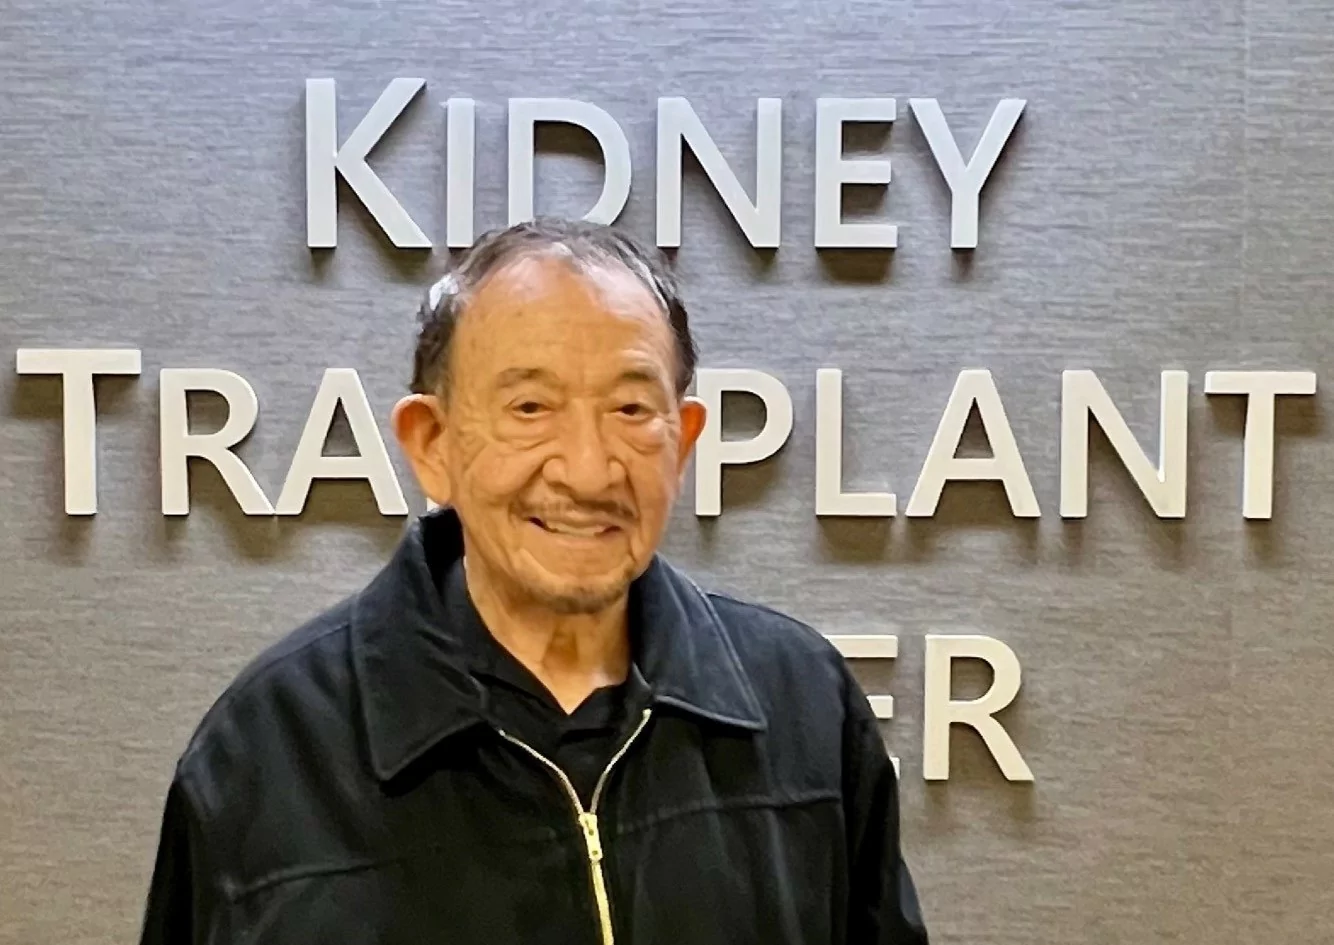 Guadalupe Alejos, who received a kidney transplant 50 years ago, standing in front of the Kidney Transplant Center sign